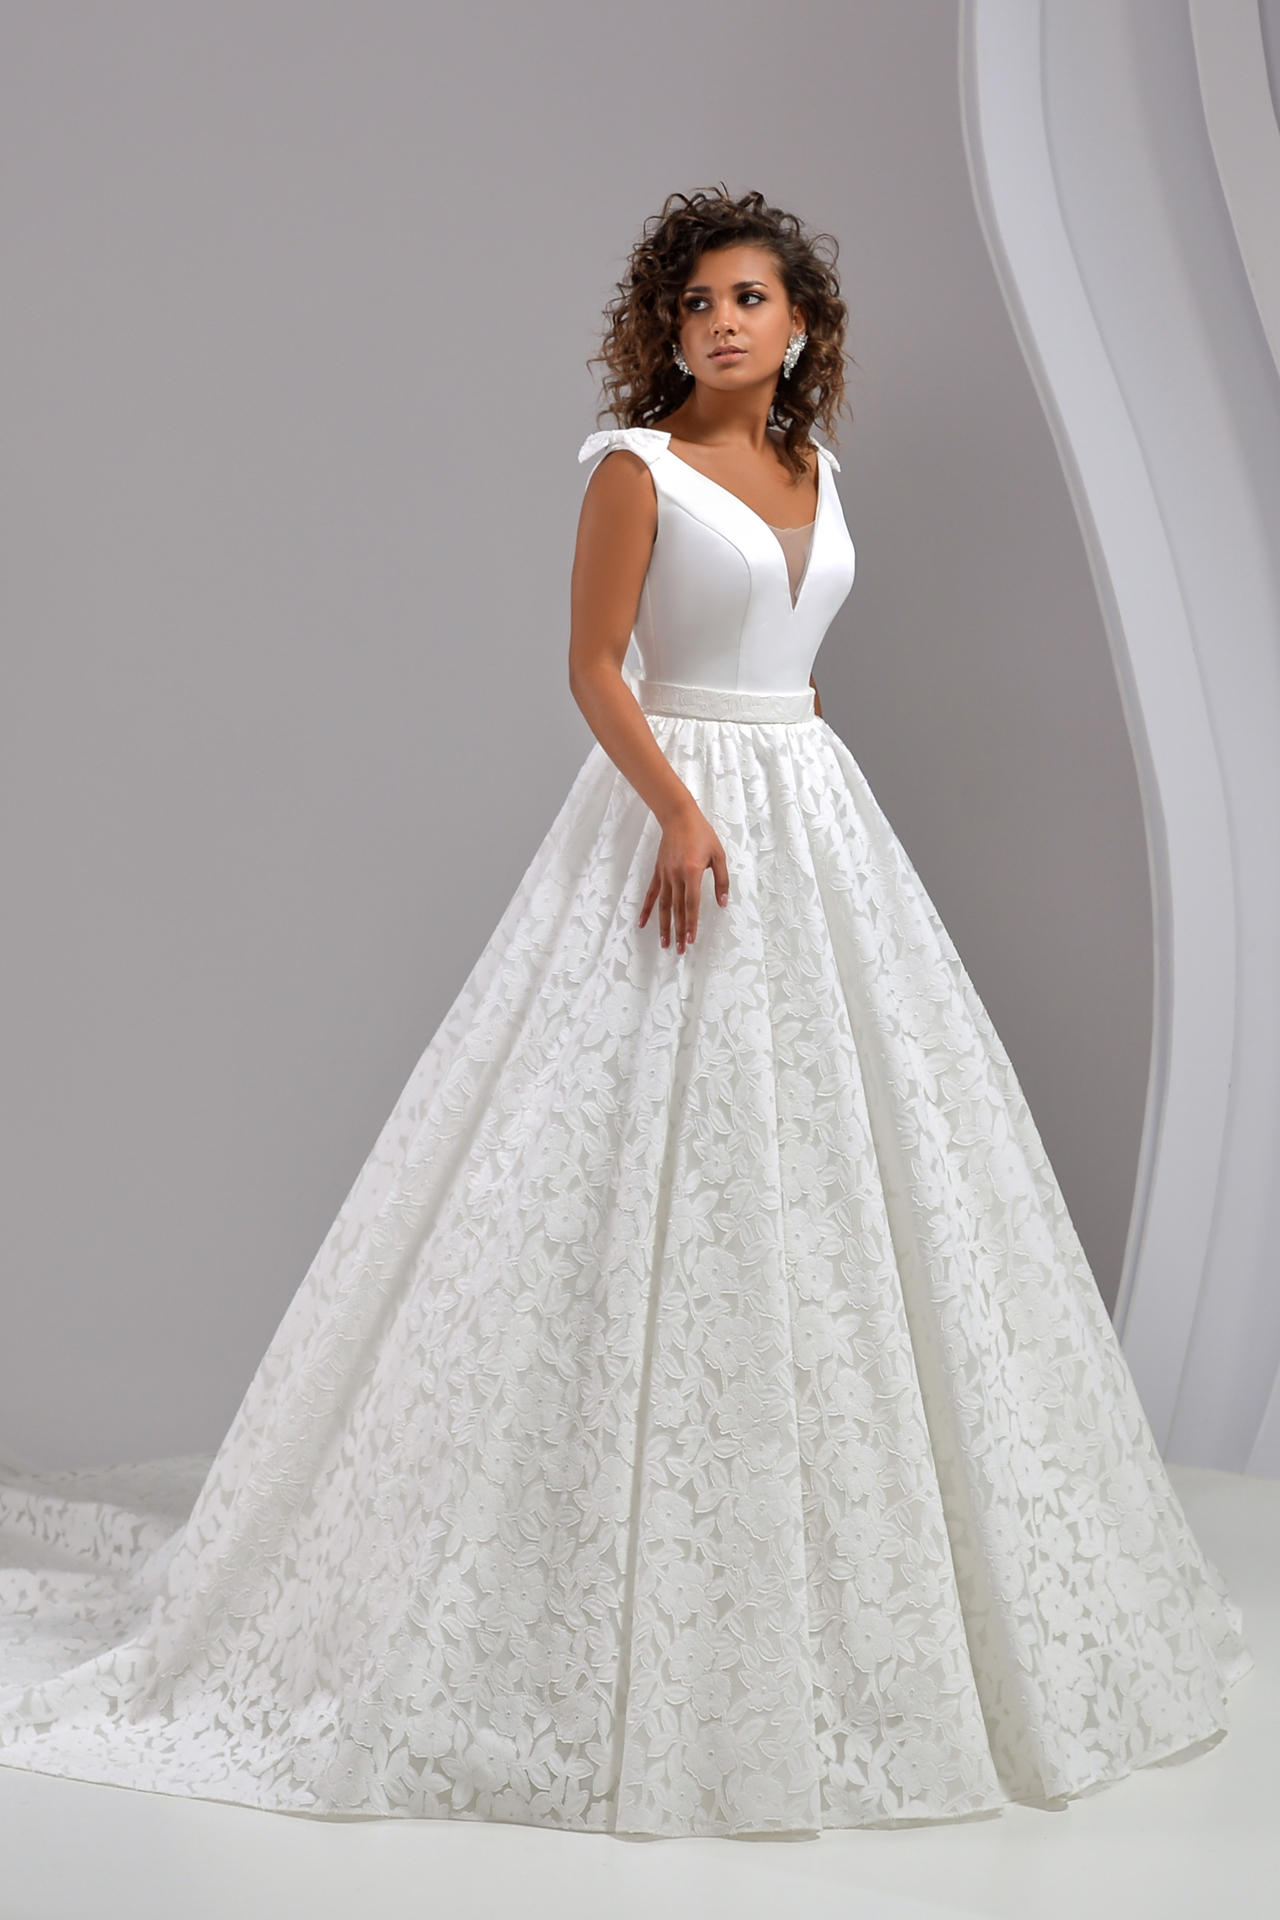 How are Premium Wedding Gowns worn by Models / Brides which weigh about  5-10kg dry-cleaned